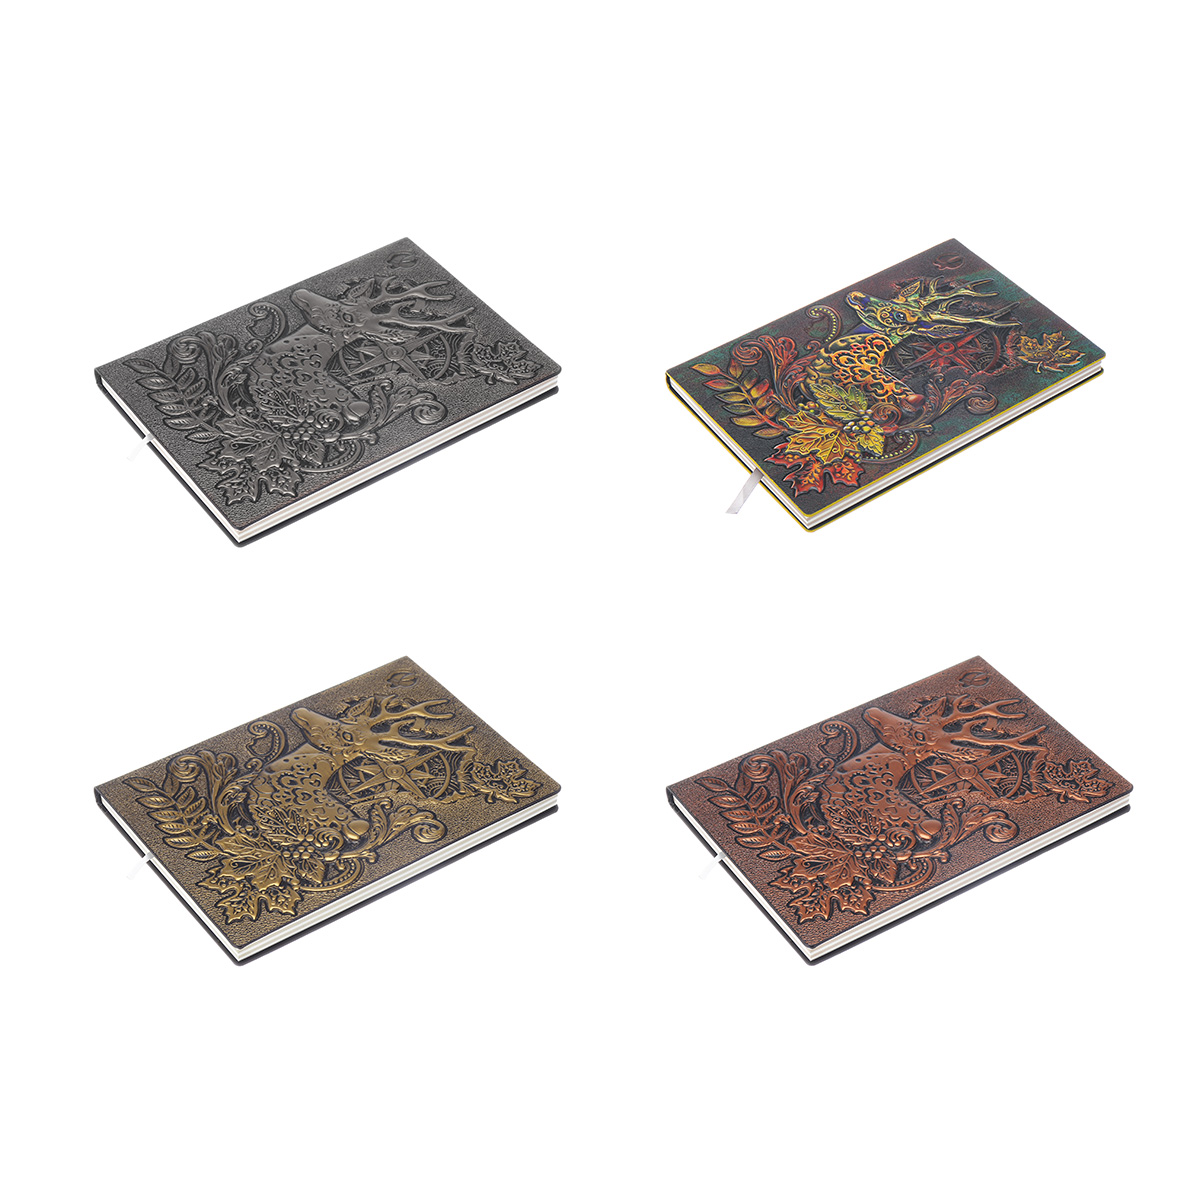 A5 Retro Notepad Relief European Notebook Gift for School Student Office Stationery Supplies—2